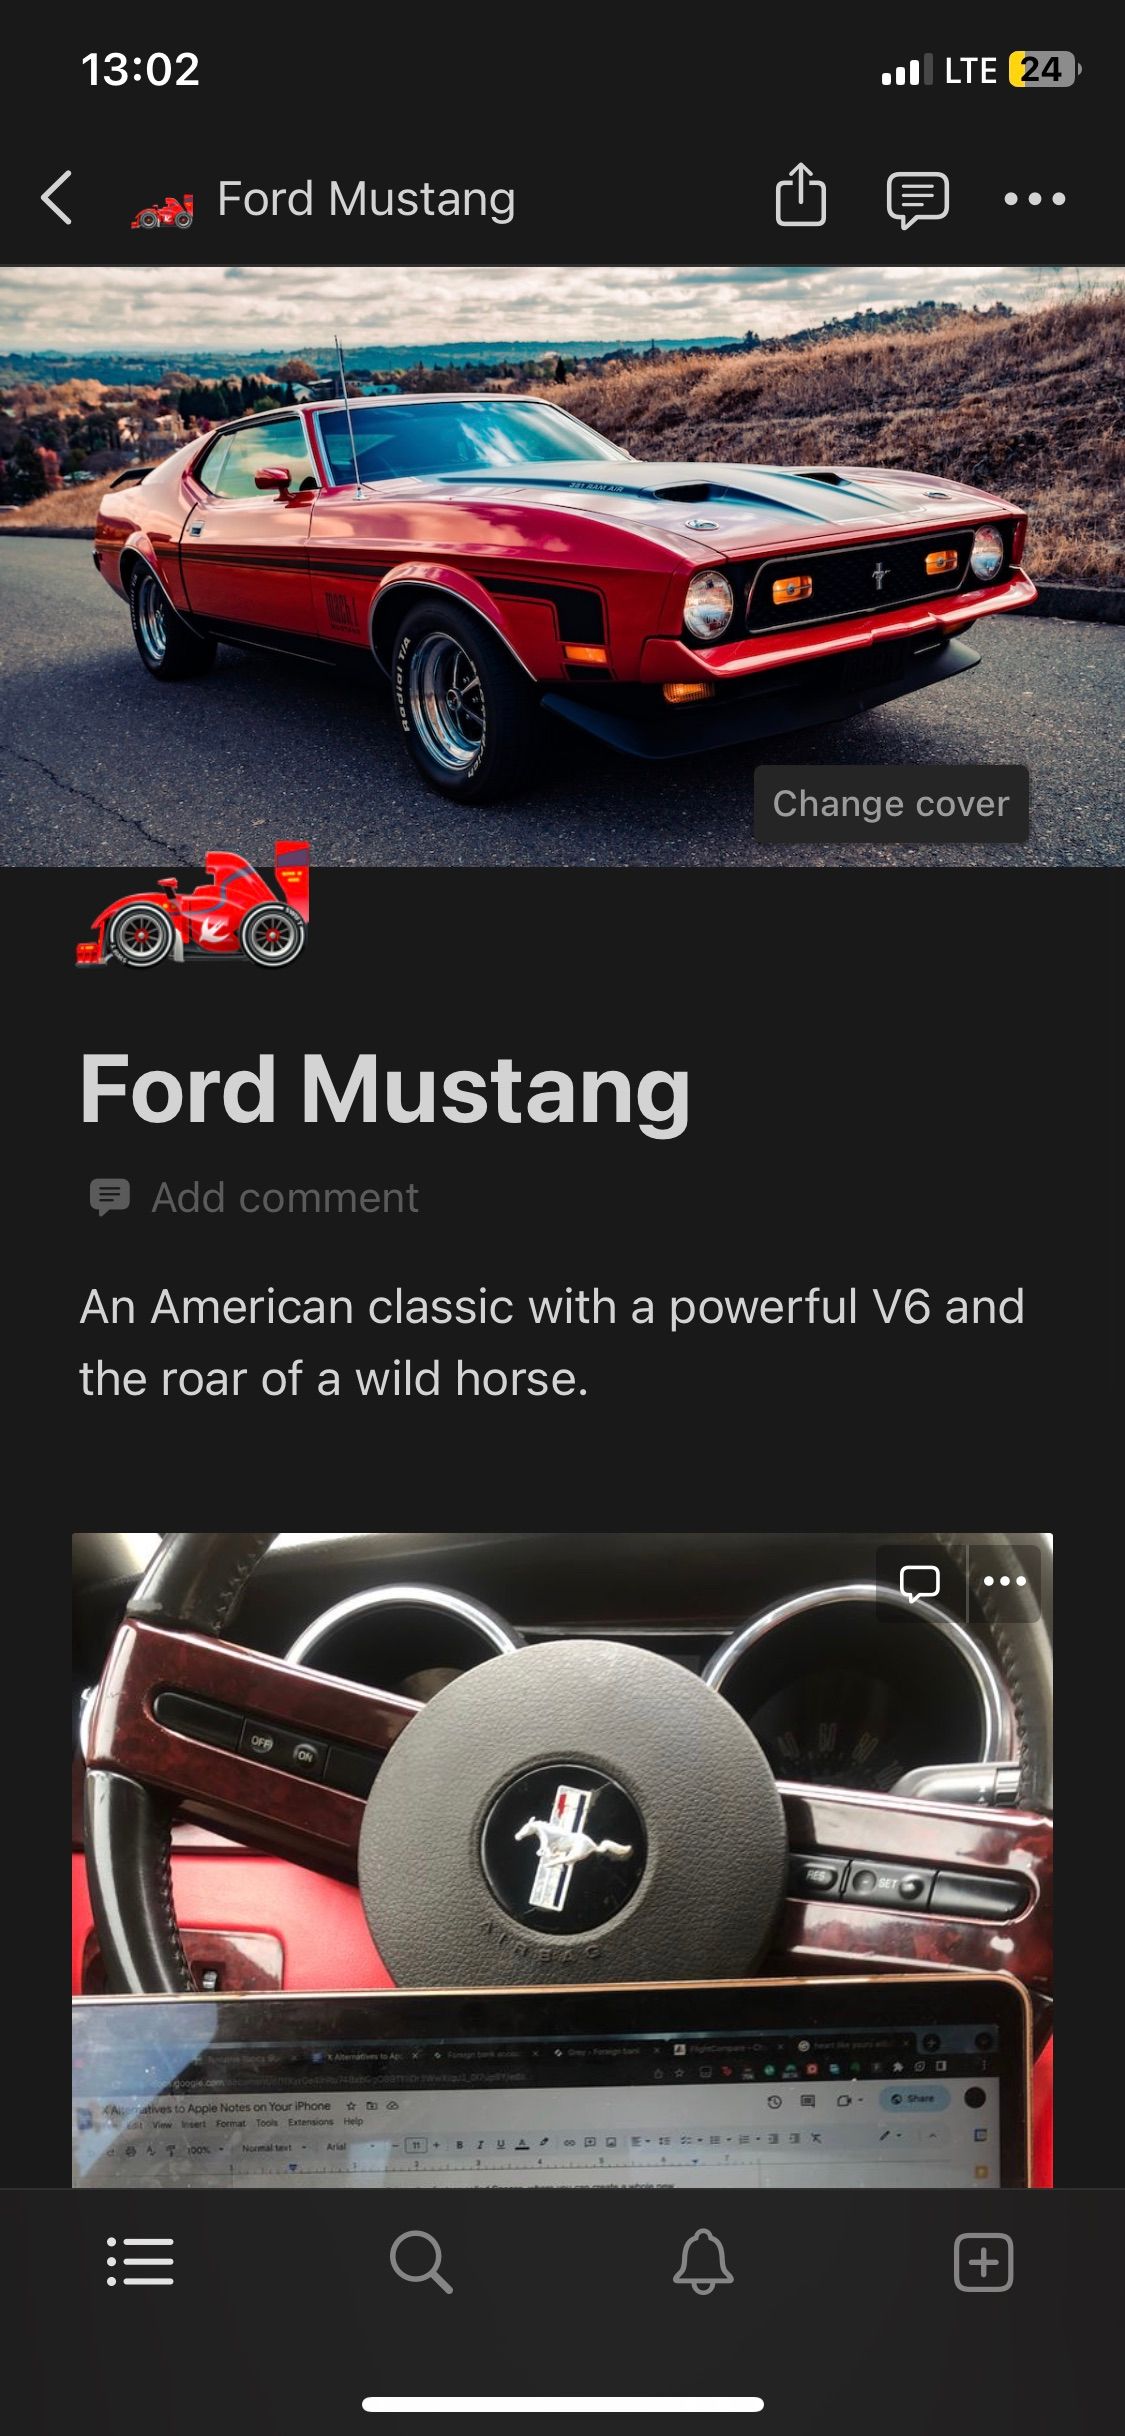 Ford Mustang notes in Notion